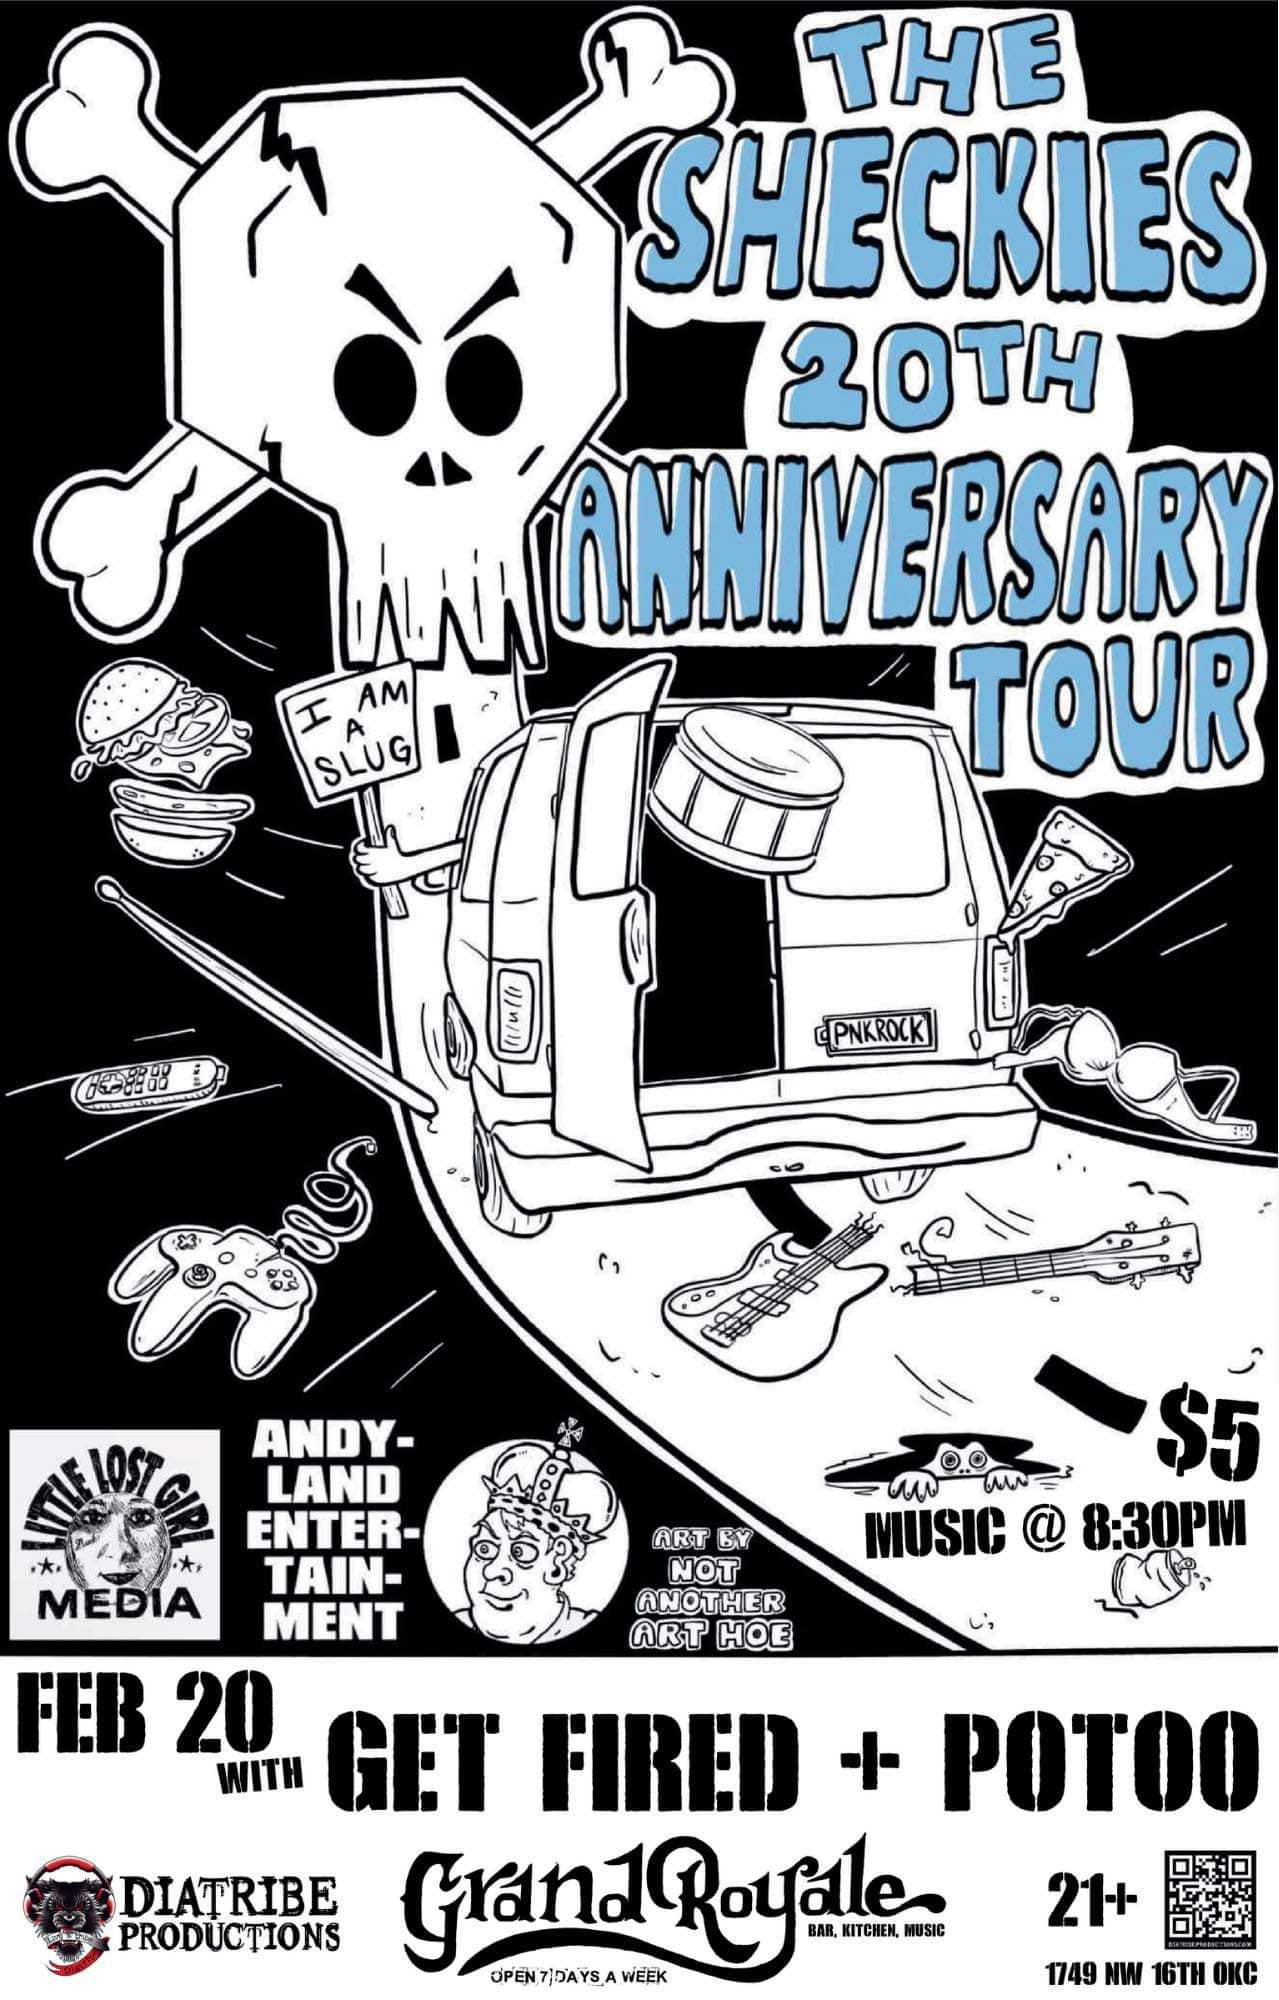 May be an image of ‎text that says '‎THE SHECKIES 20TH بيا AM ANNIVERSARY SLUG TOUR PNKROCK ART BY NOT ANOTHER ART HOE $5 MUSIC @ 8:30PM ANDY- LAND ENTER- TAIN- MEDIA MENT FEB 20 WITH GET FIRED + POTOO GranaRoyale KITCHEN, MUSIC 21+ 1749 NW 16TH oKc DIATRIBE PRODUCTIONS‎'‎